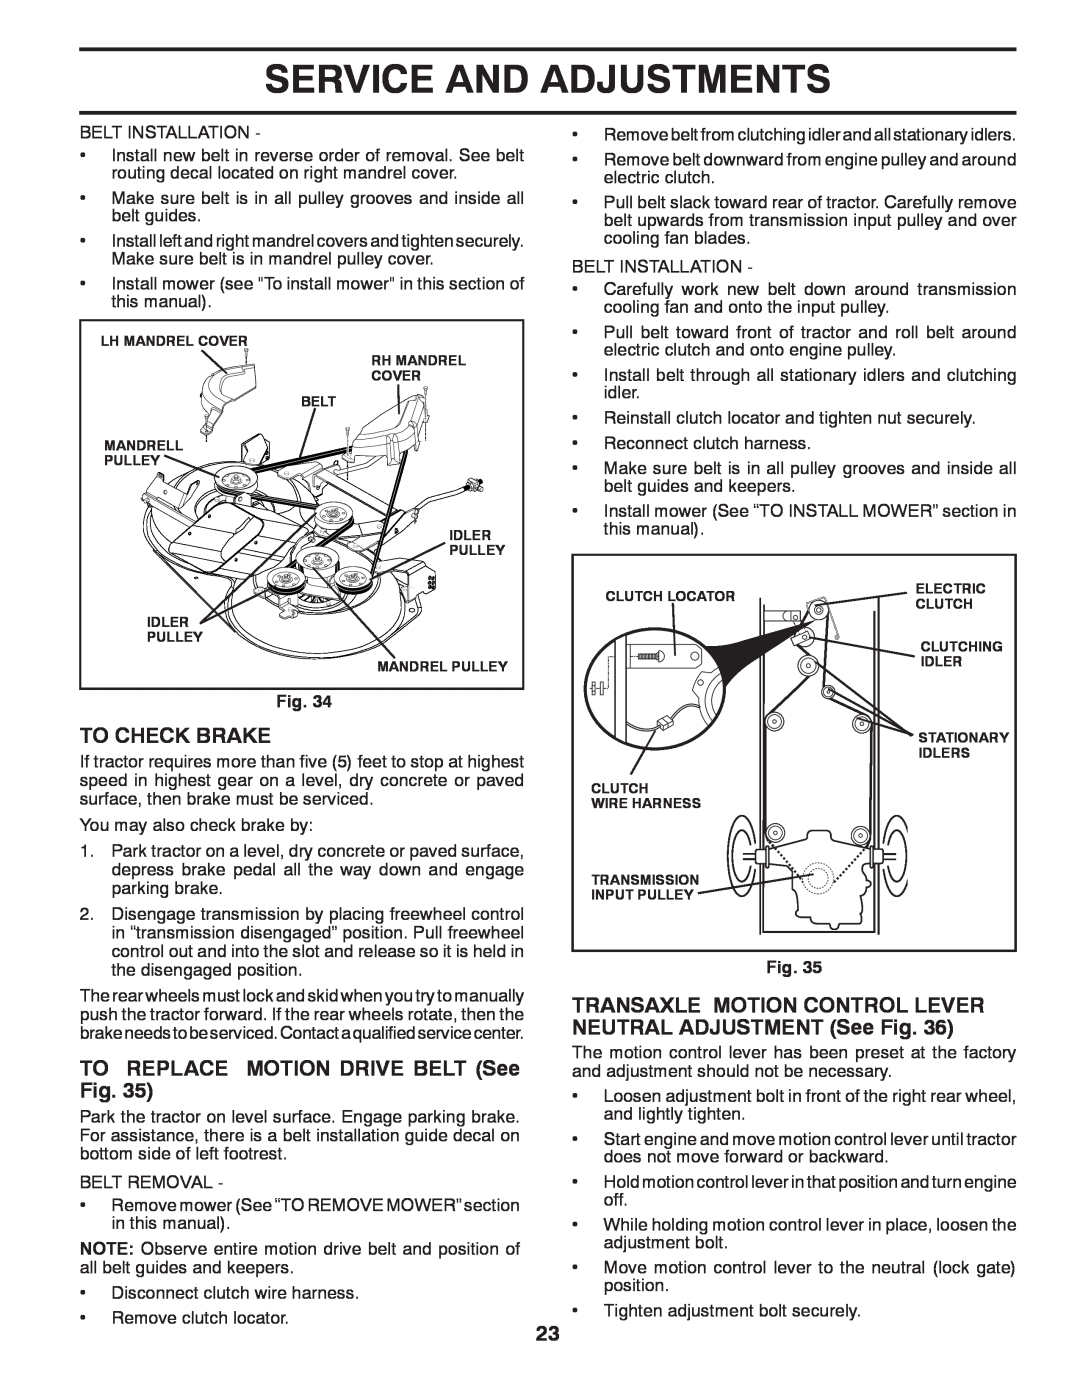 Husqvarna CTH2036T manual To Check Brake, TO REPLACE MOTION DRIVE BELT See Fig, Service And Adjustments 